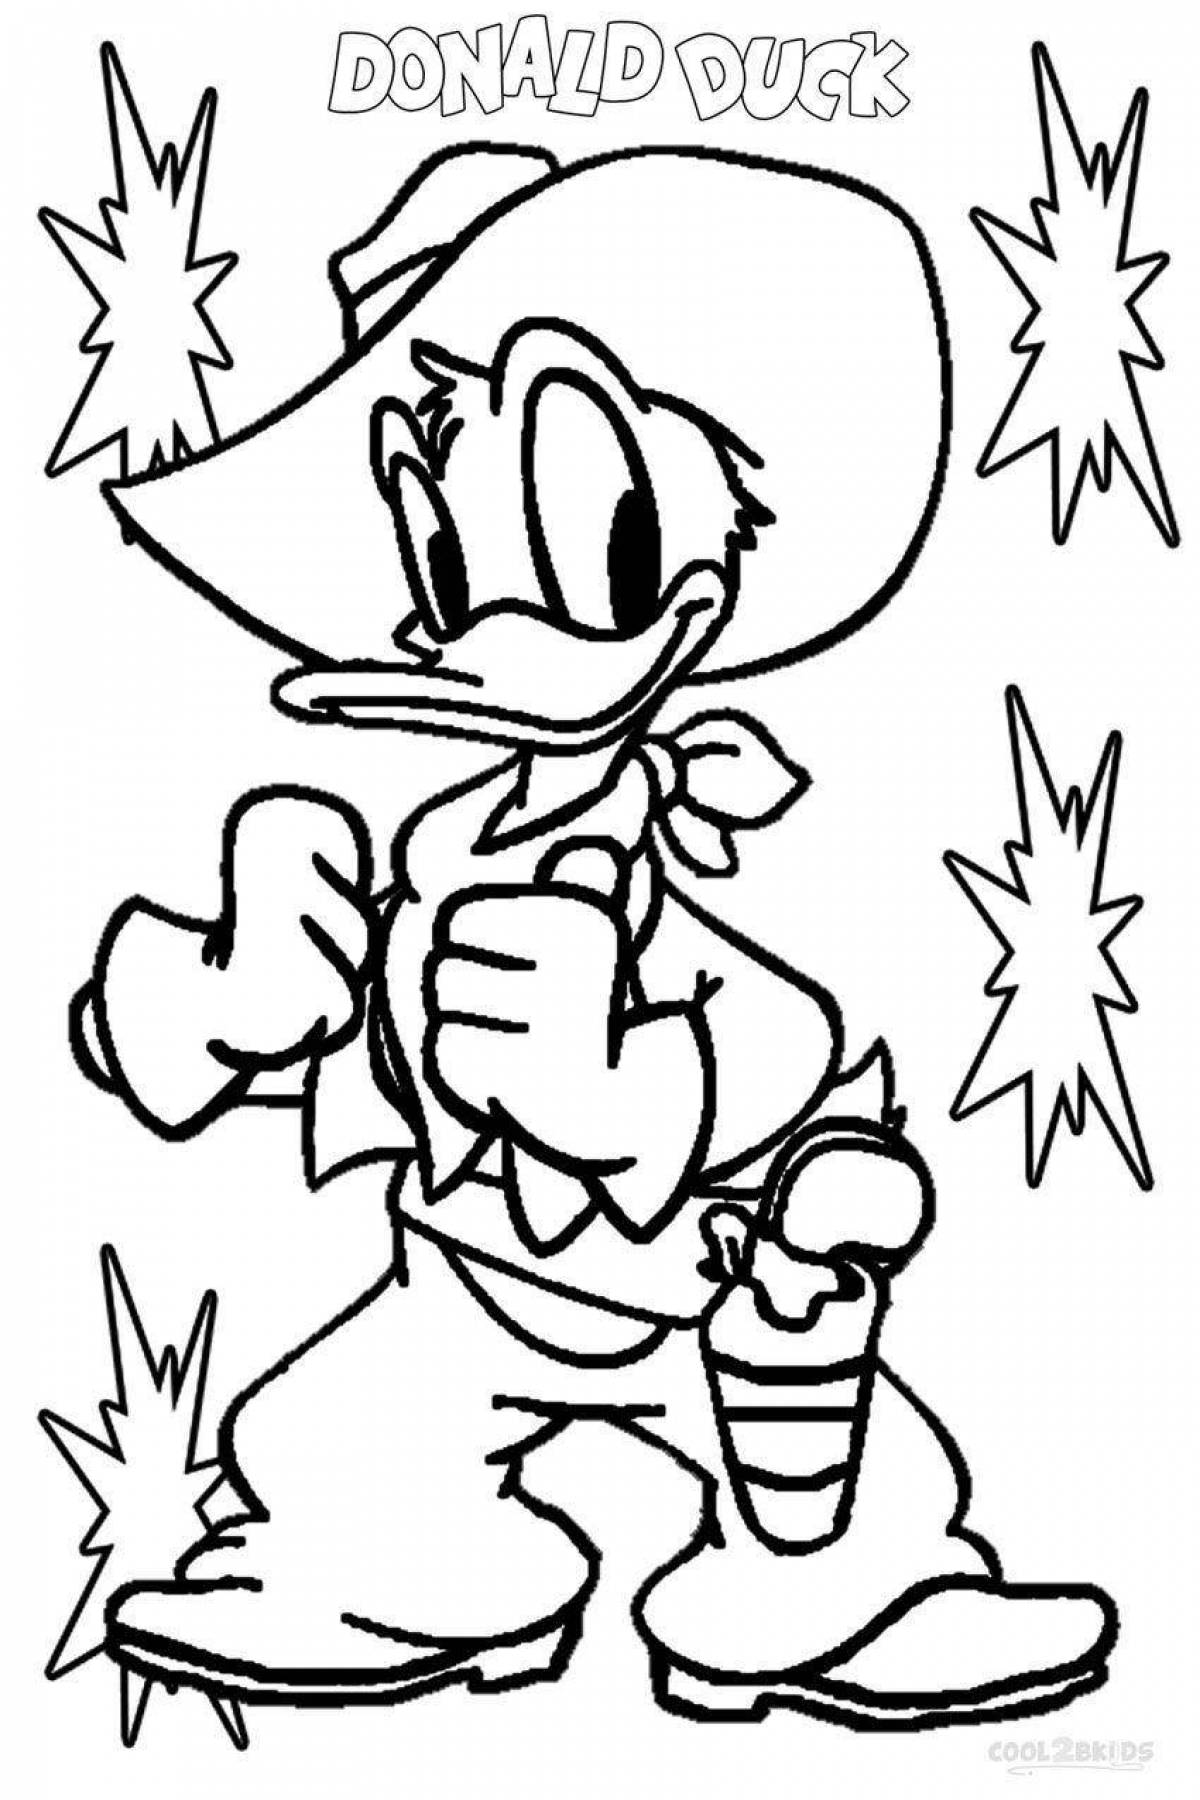 Donald duck with money #2